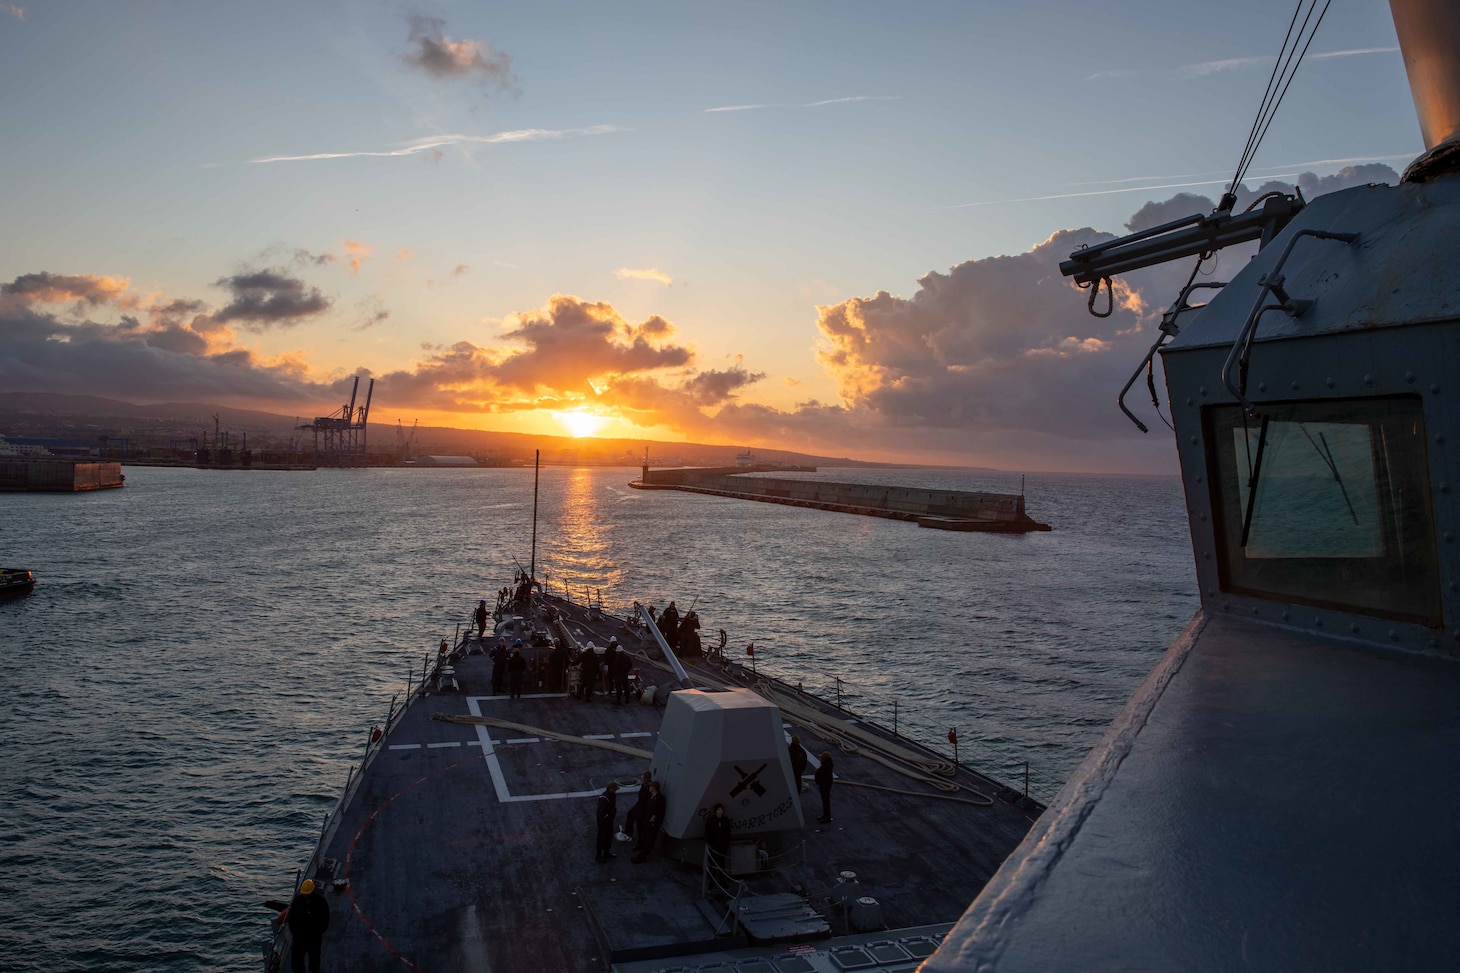 Dec. 29, 2022) The Arleigh Burke-class guided-missile destroyer USS Nitze (DDG 94) arrives in Civitavecchia, Italy for a scheduled port visit, Dec. 29, 2022. The George H.W. Bush Carrier Strike Group is on a scheduled deployment in the U.S. Naval Forces Europe area of operations, employed by U.S. Sixth Fleet to defend U.S., allied, and partner interests.